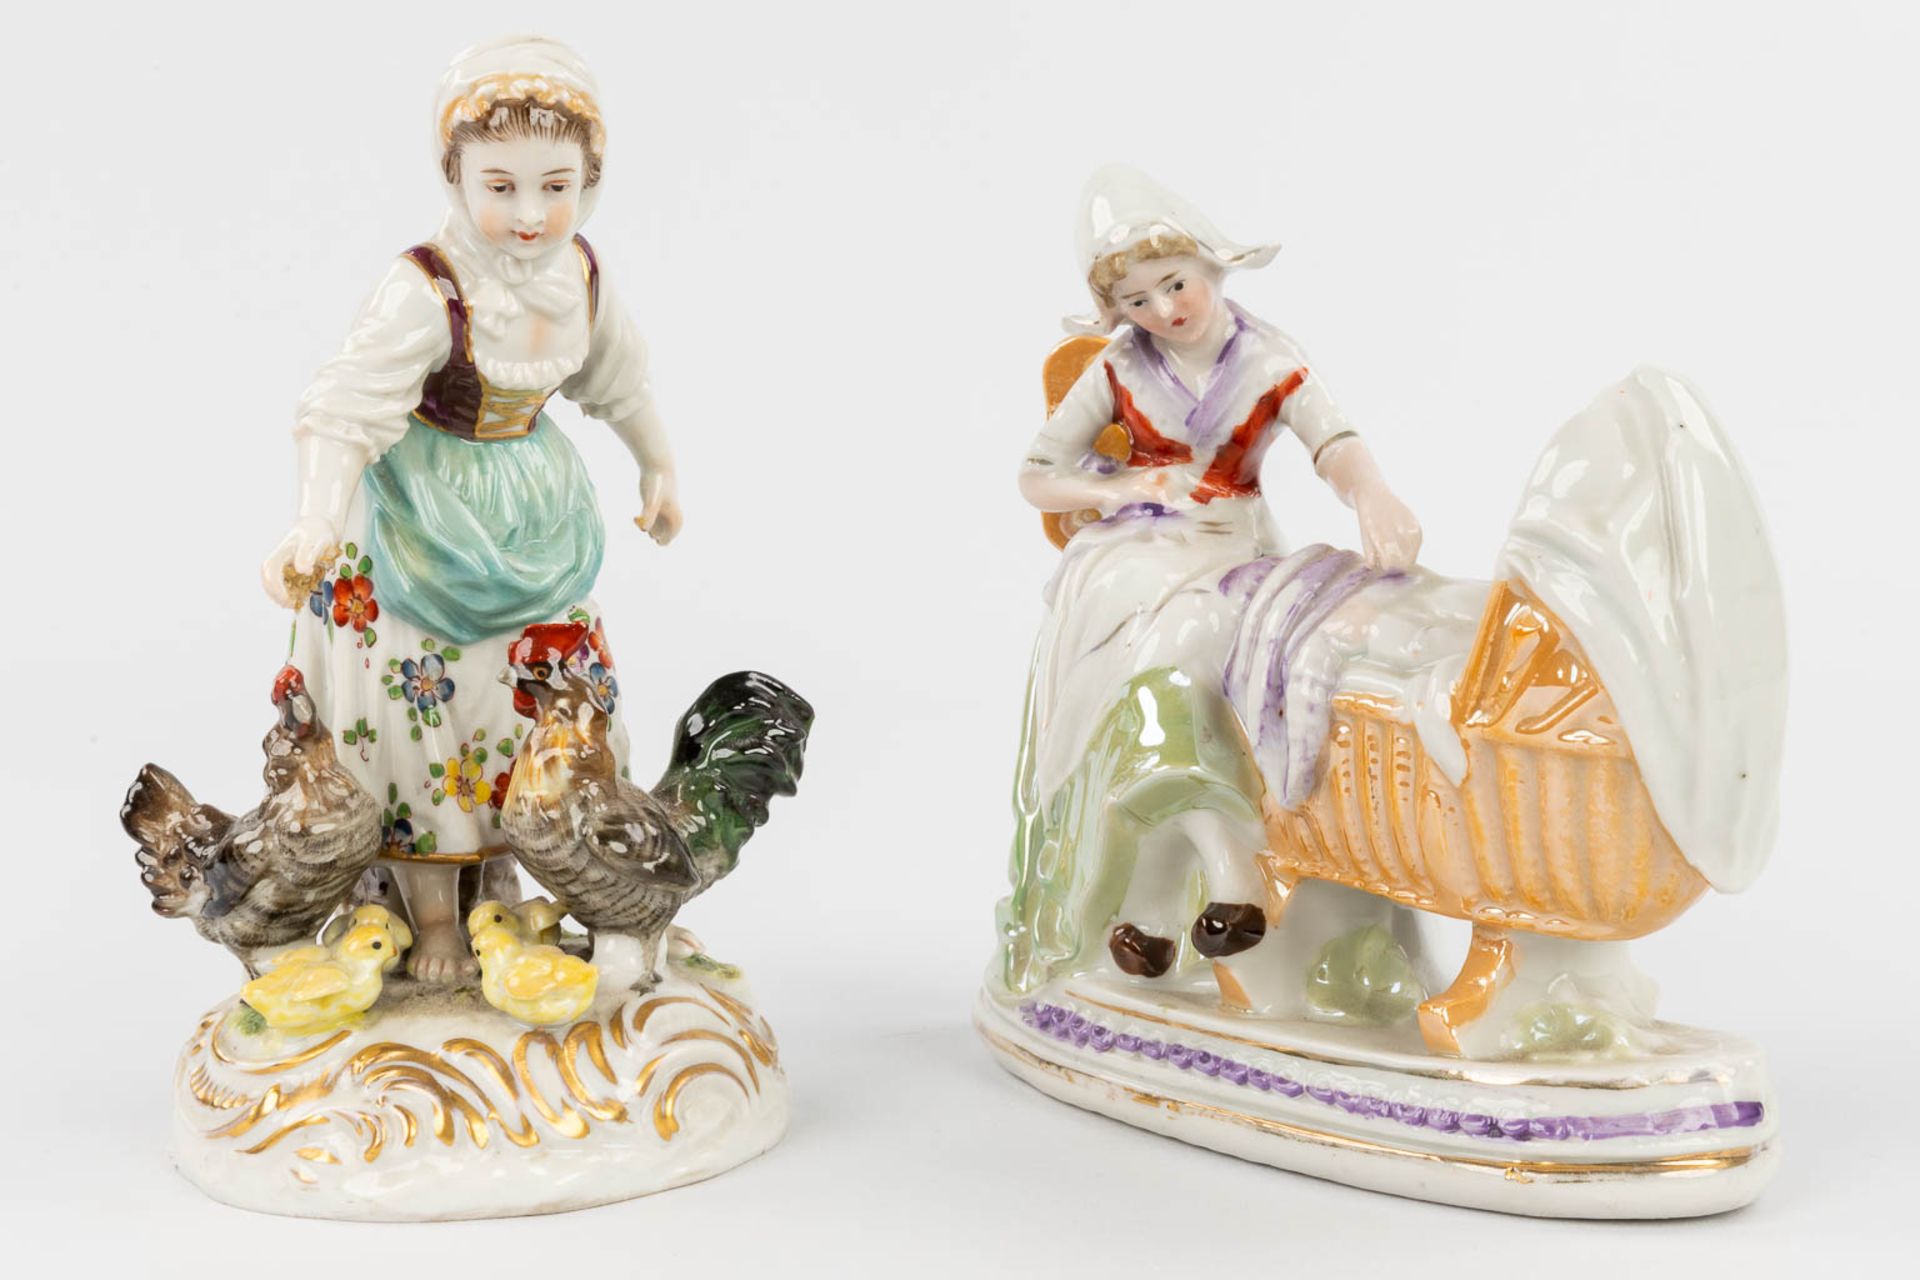 Volkstedt, a collection of 2 figurines made of porcelain in Germany. (H:13 cm) - Image 10 of 14